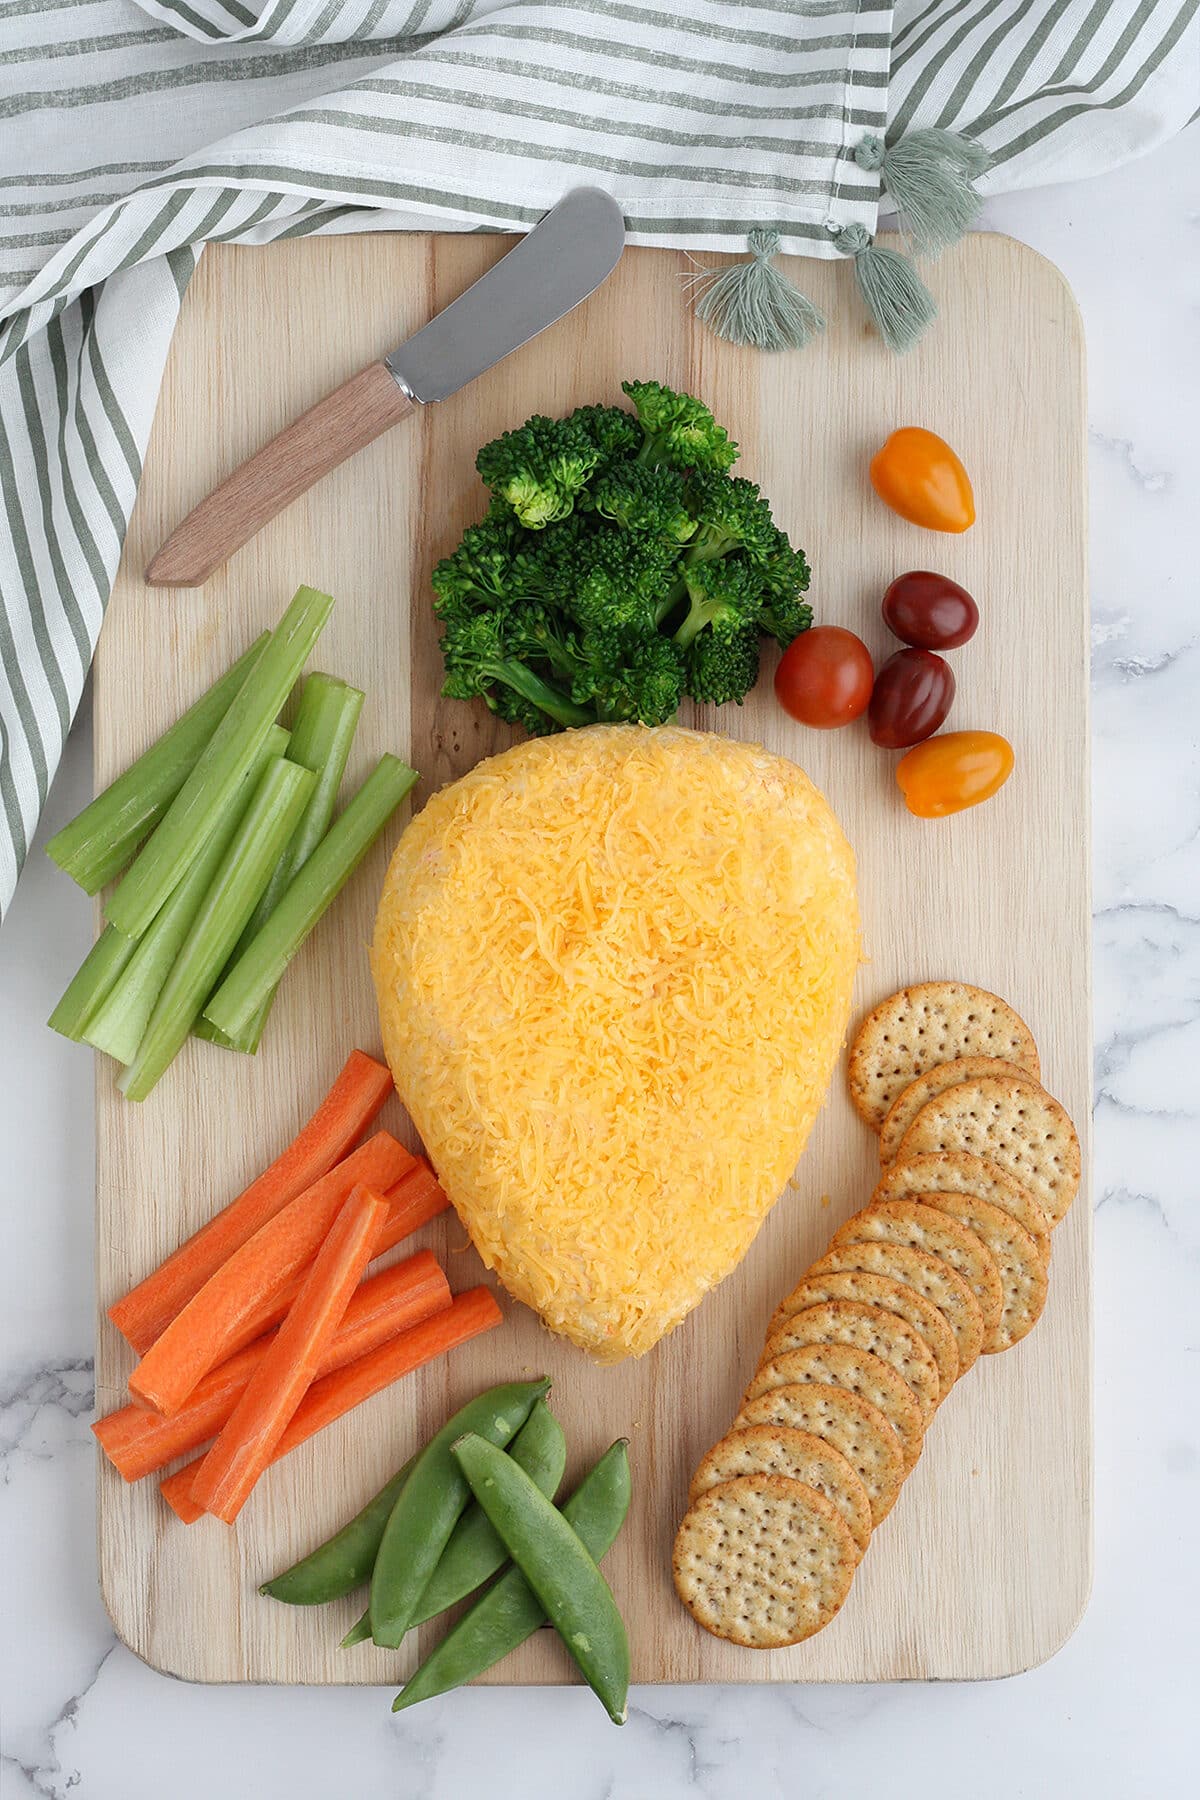 a cheeseball shaped like a carrot with crackers and vegetables